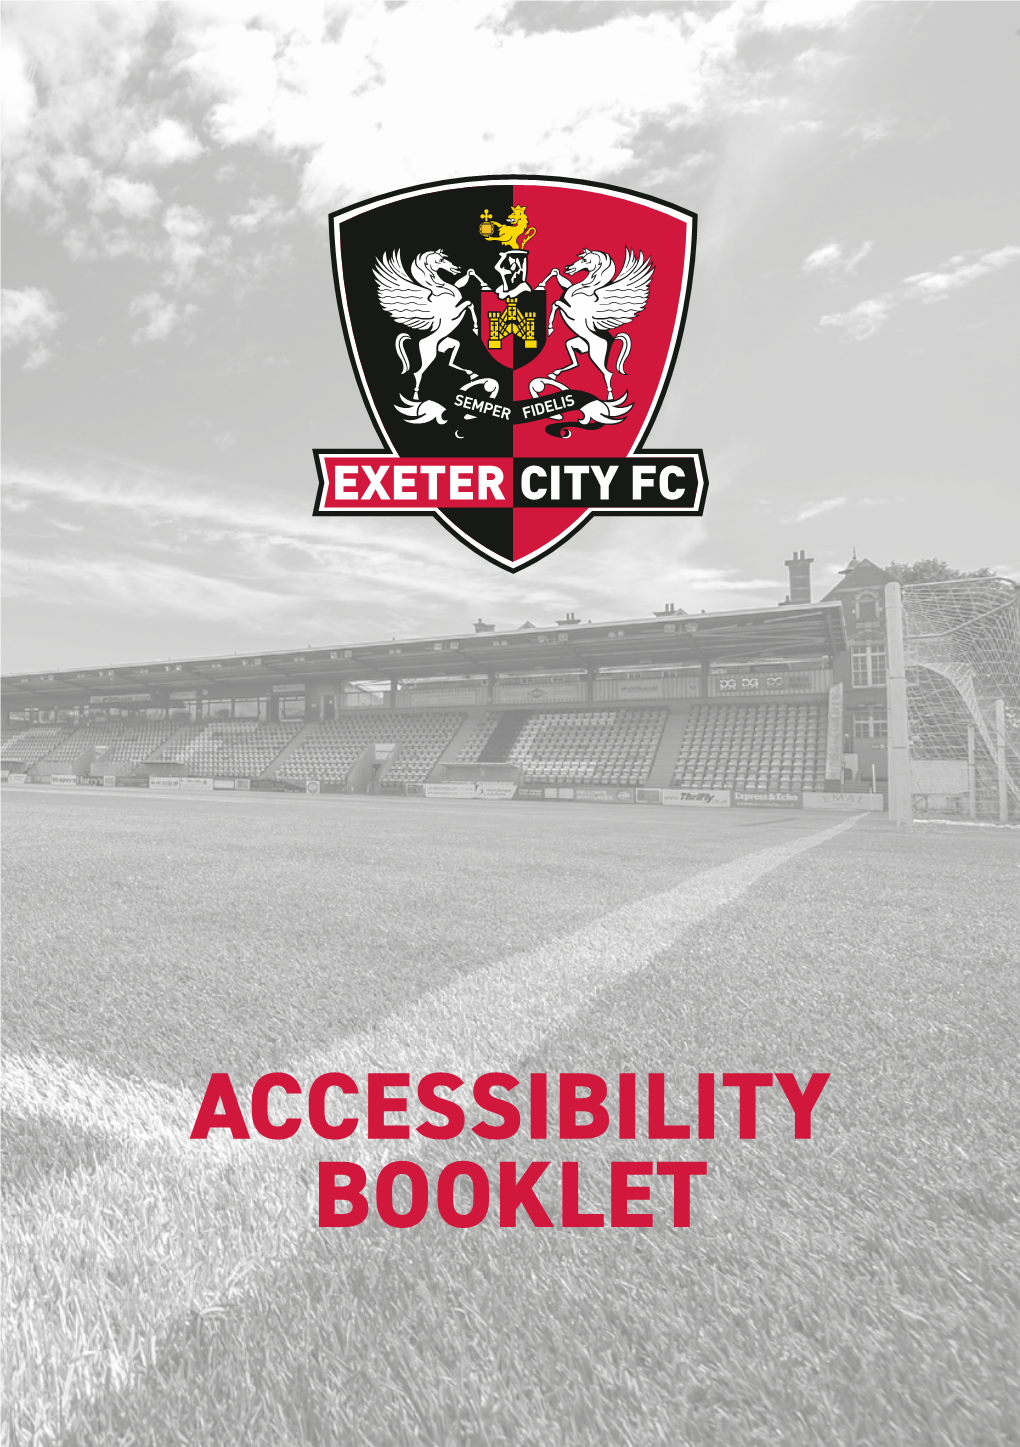 Accessibilty Booklet